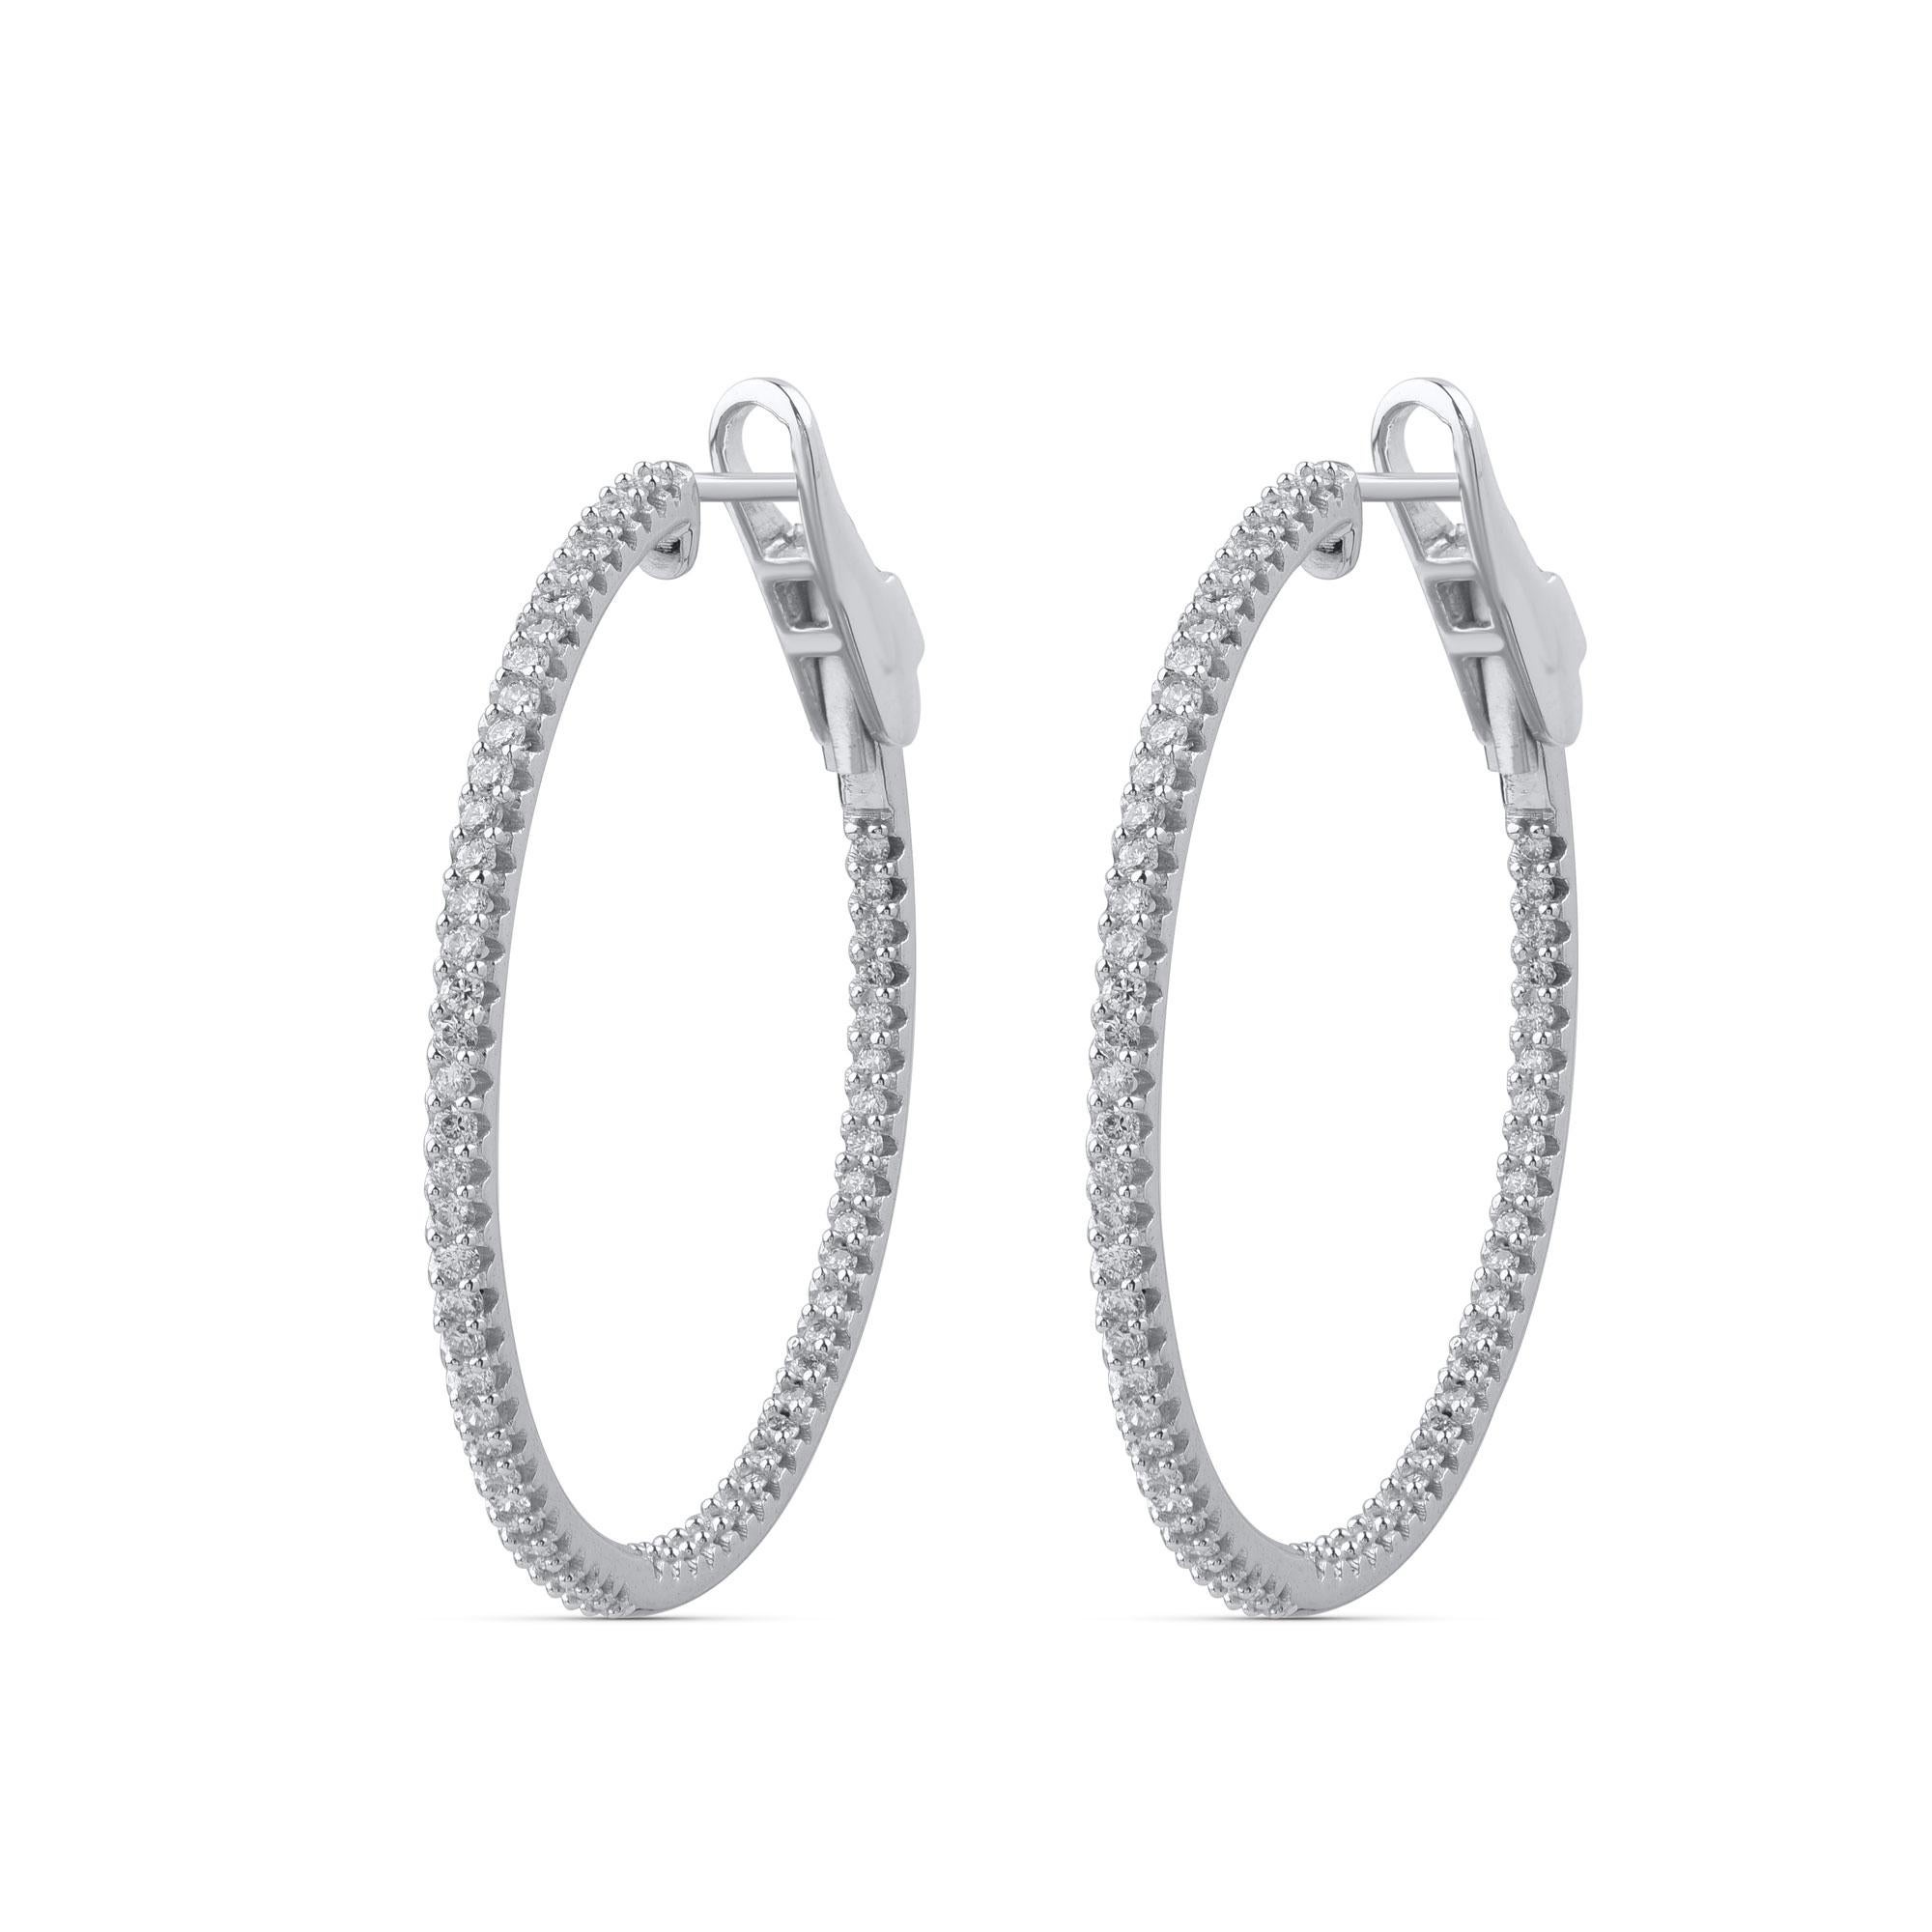 These diamond hoop earrings will brighten up your everyday look. These sleek diamond hoop earrings are accented with 122 round-cut diamonds in prong setting and hand-crafted by our in-house experts in 10 kt white gold. Diamonds are graded H-I Color,